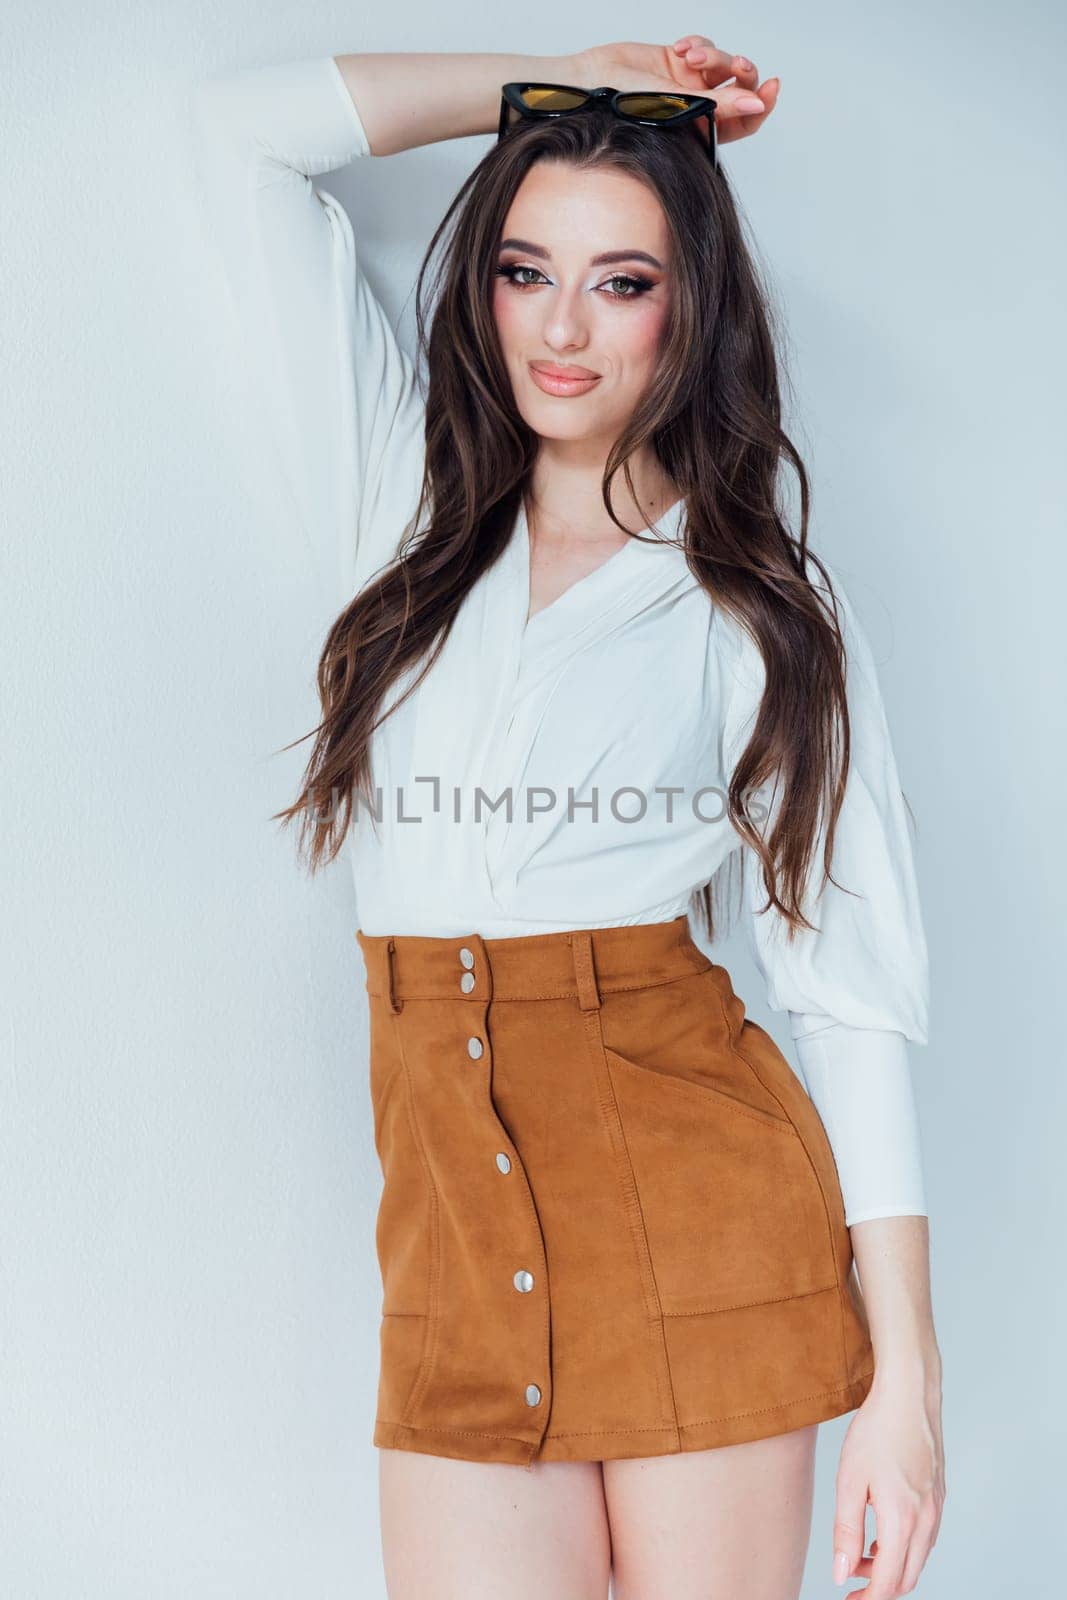 fashionable woman in blouse and yellow skirt on white background by Simakov